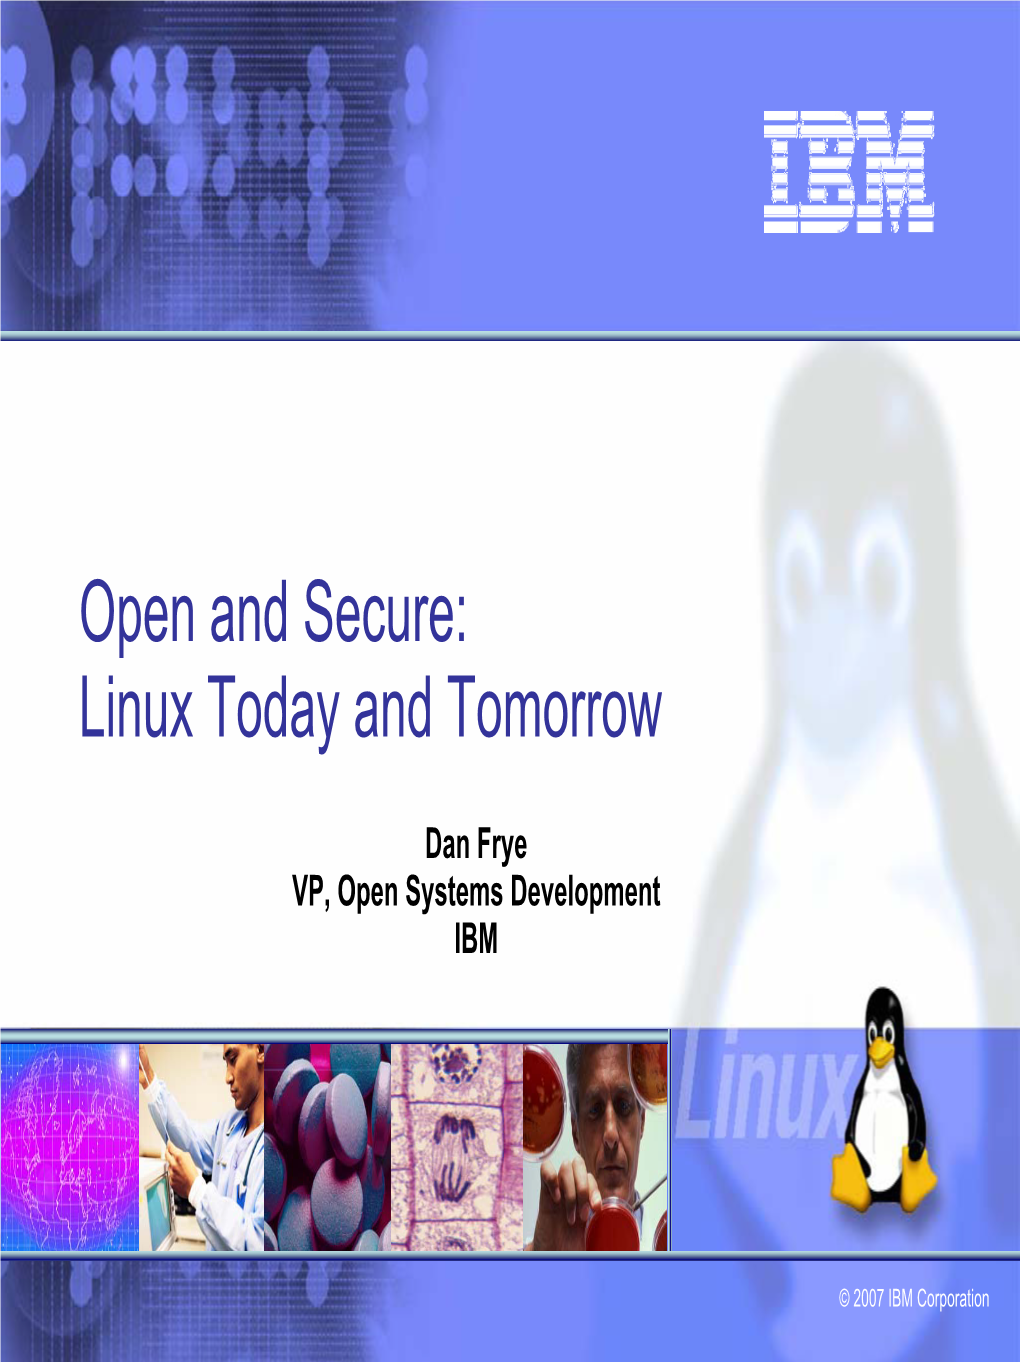 Open and Secure: Linux Today and Tomorrow